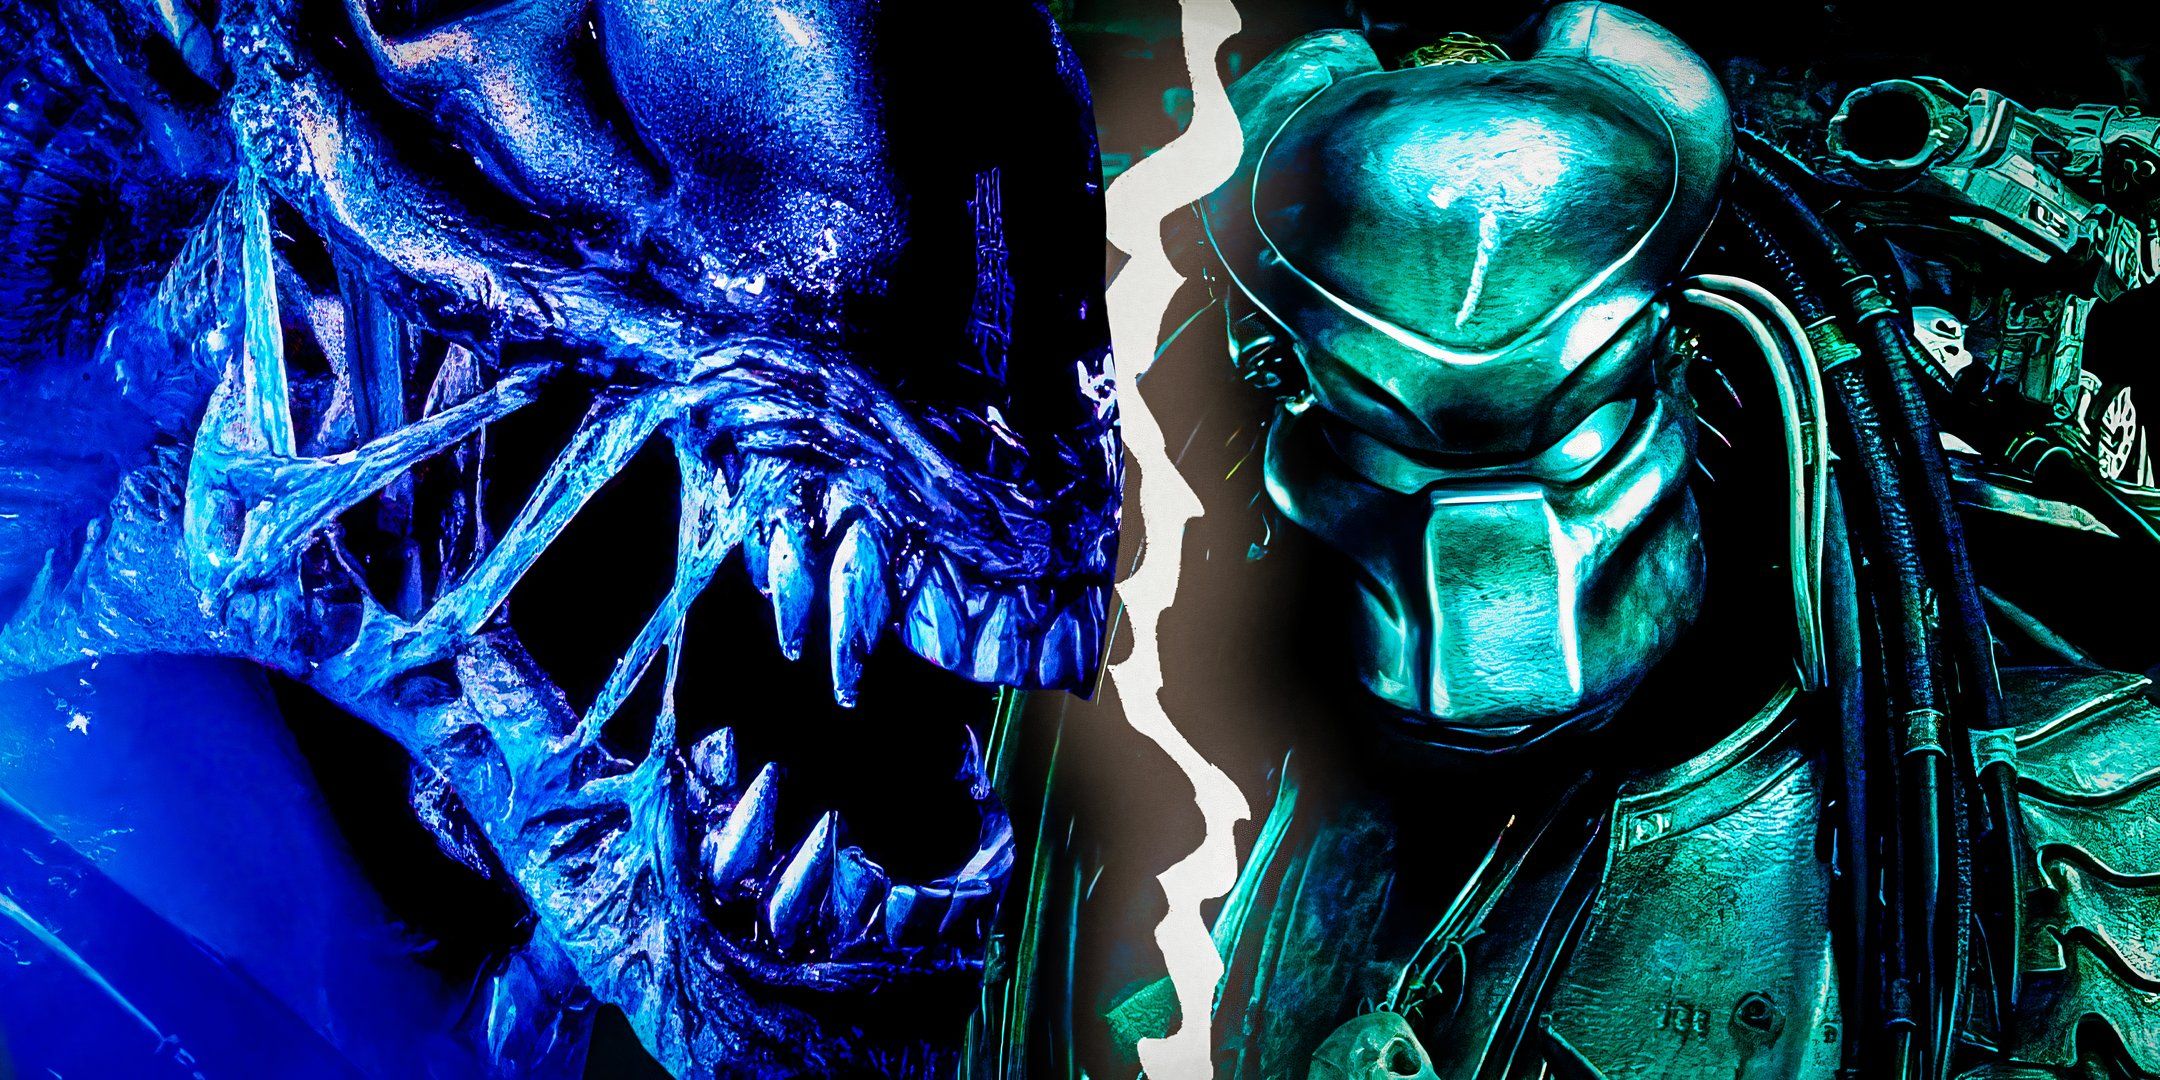 Forget Alien, Predator's Next Crossover Should Be With This $2.1 Billion Franchise